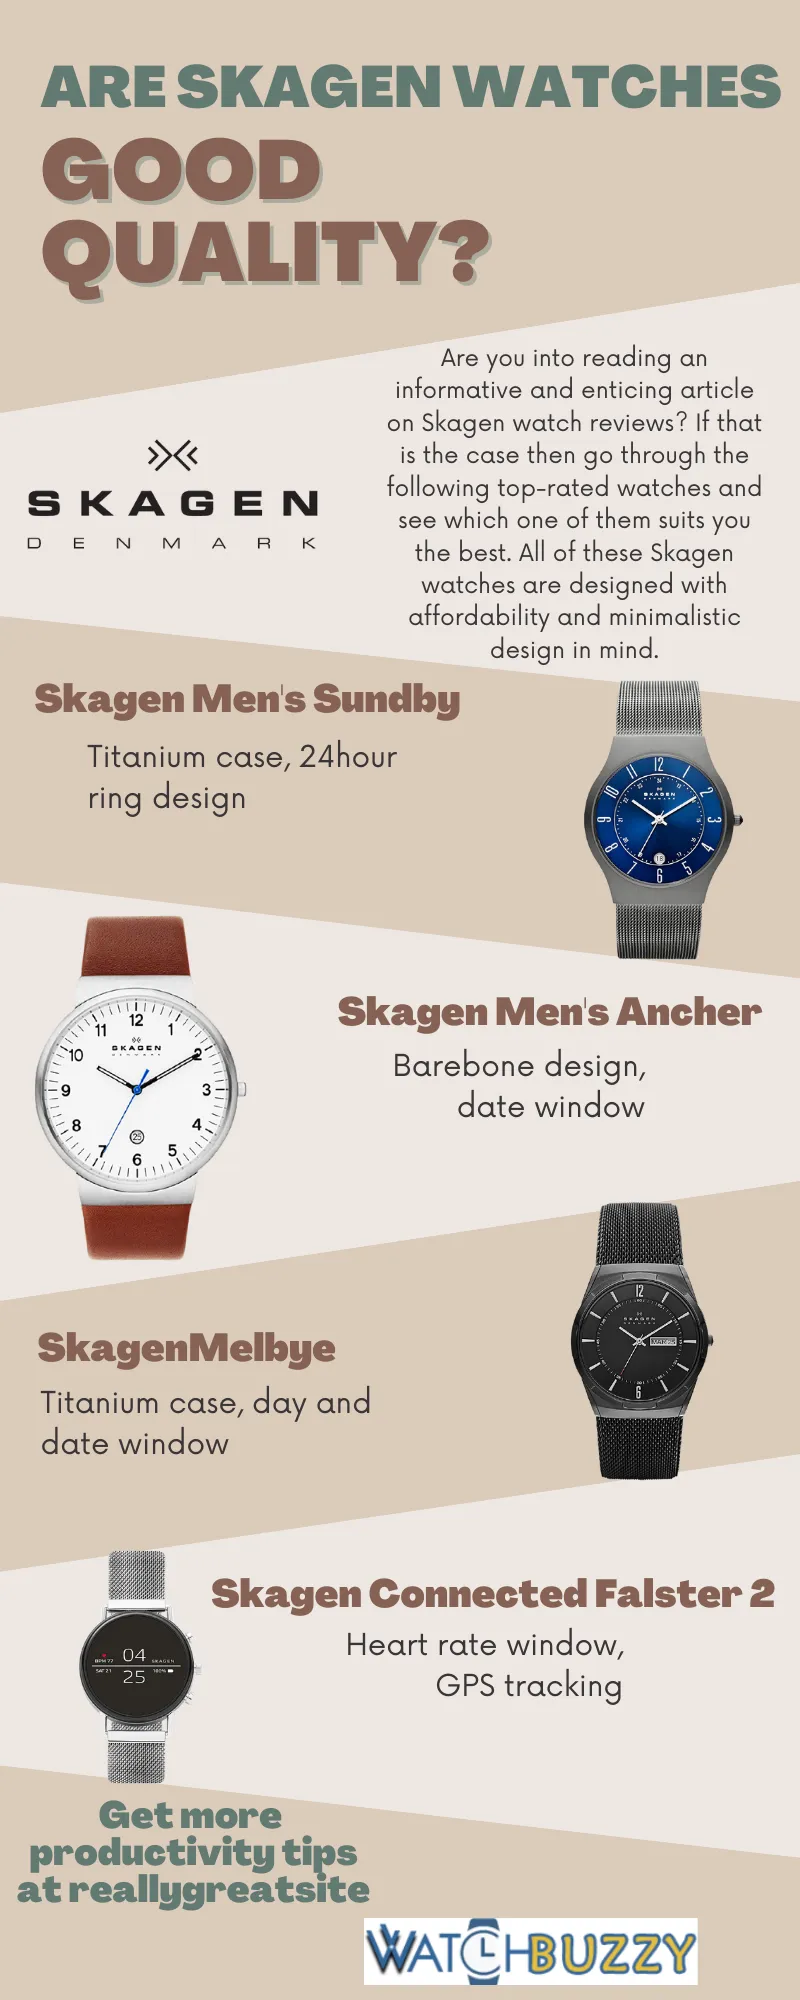 Are Skagen Watches Good Quality